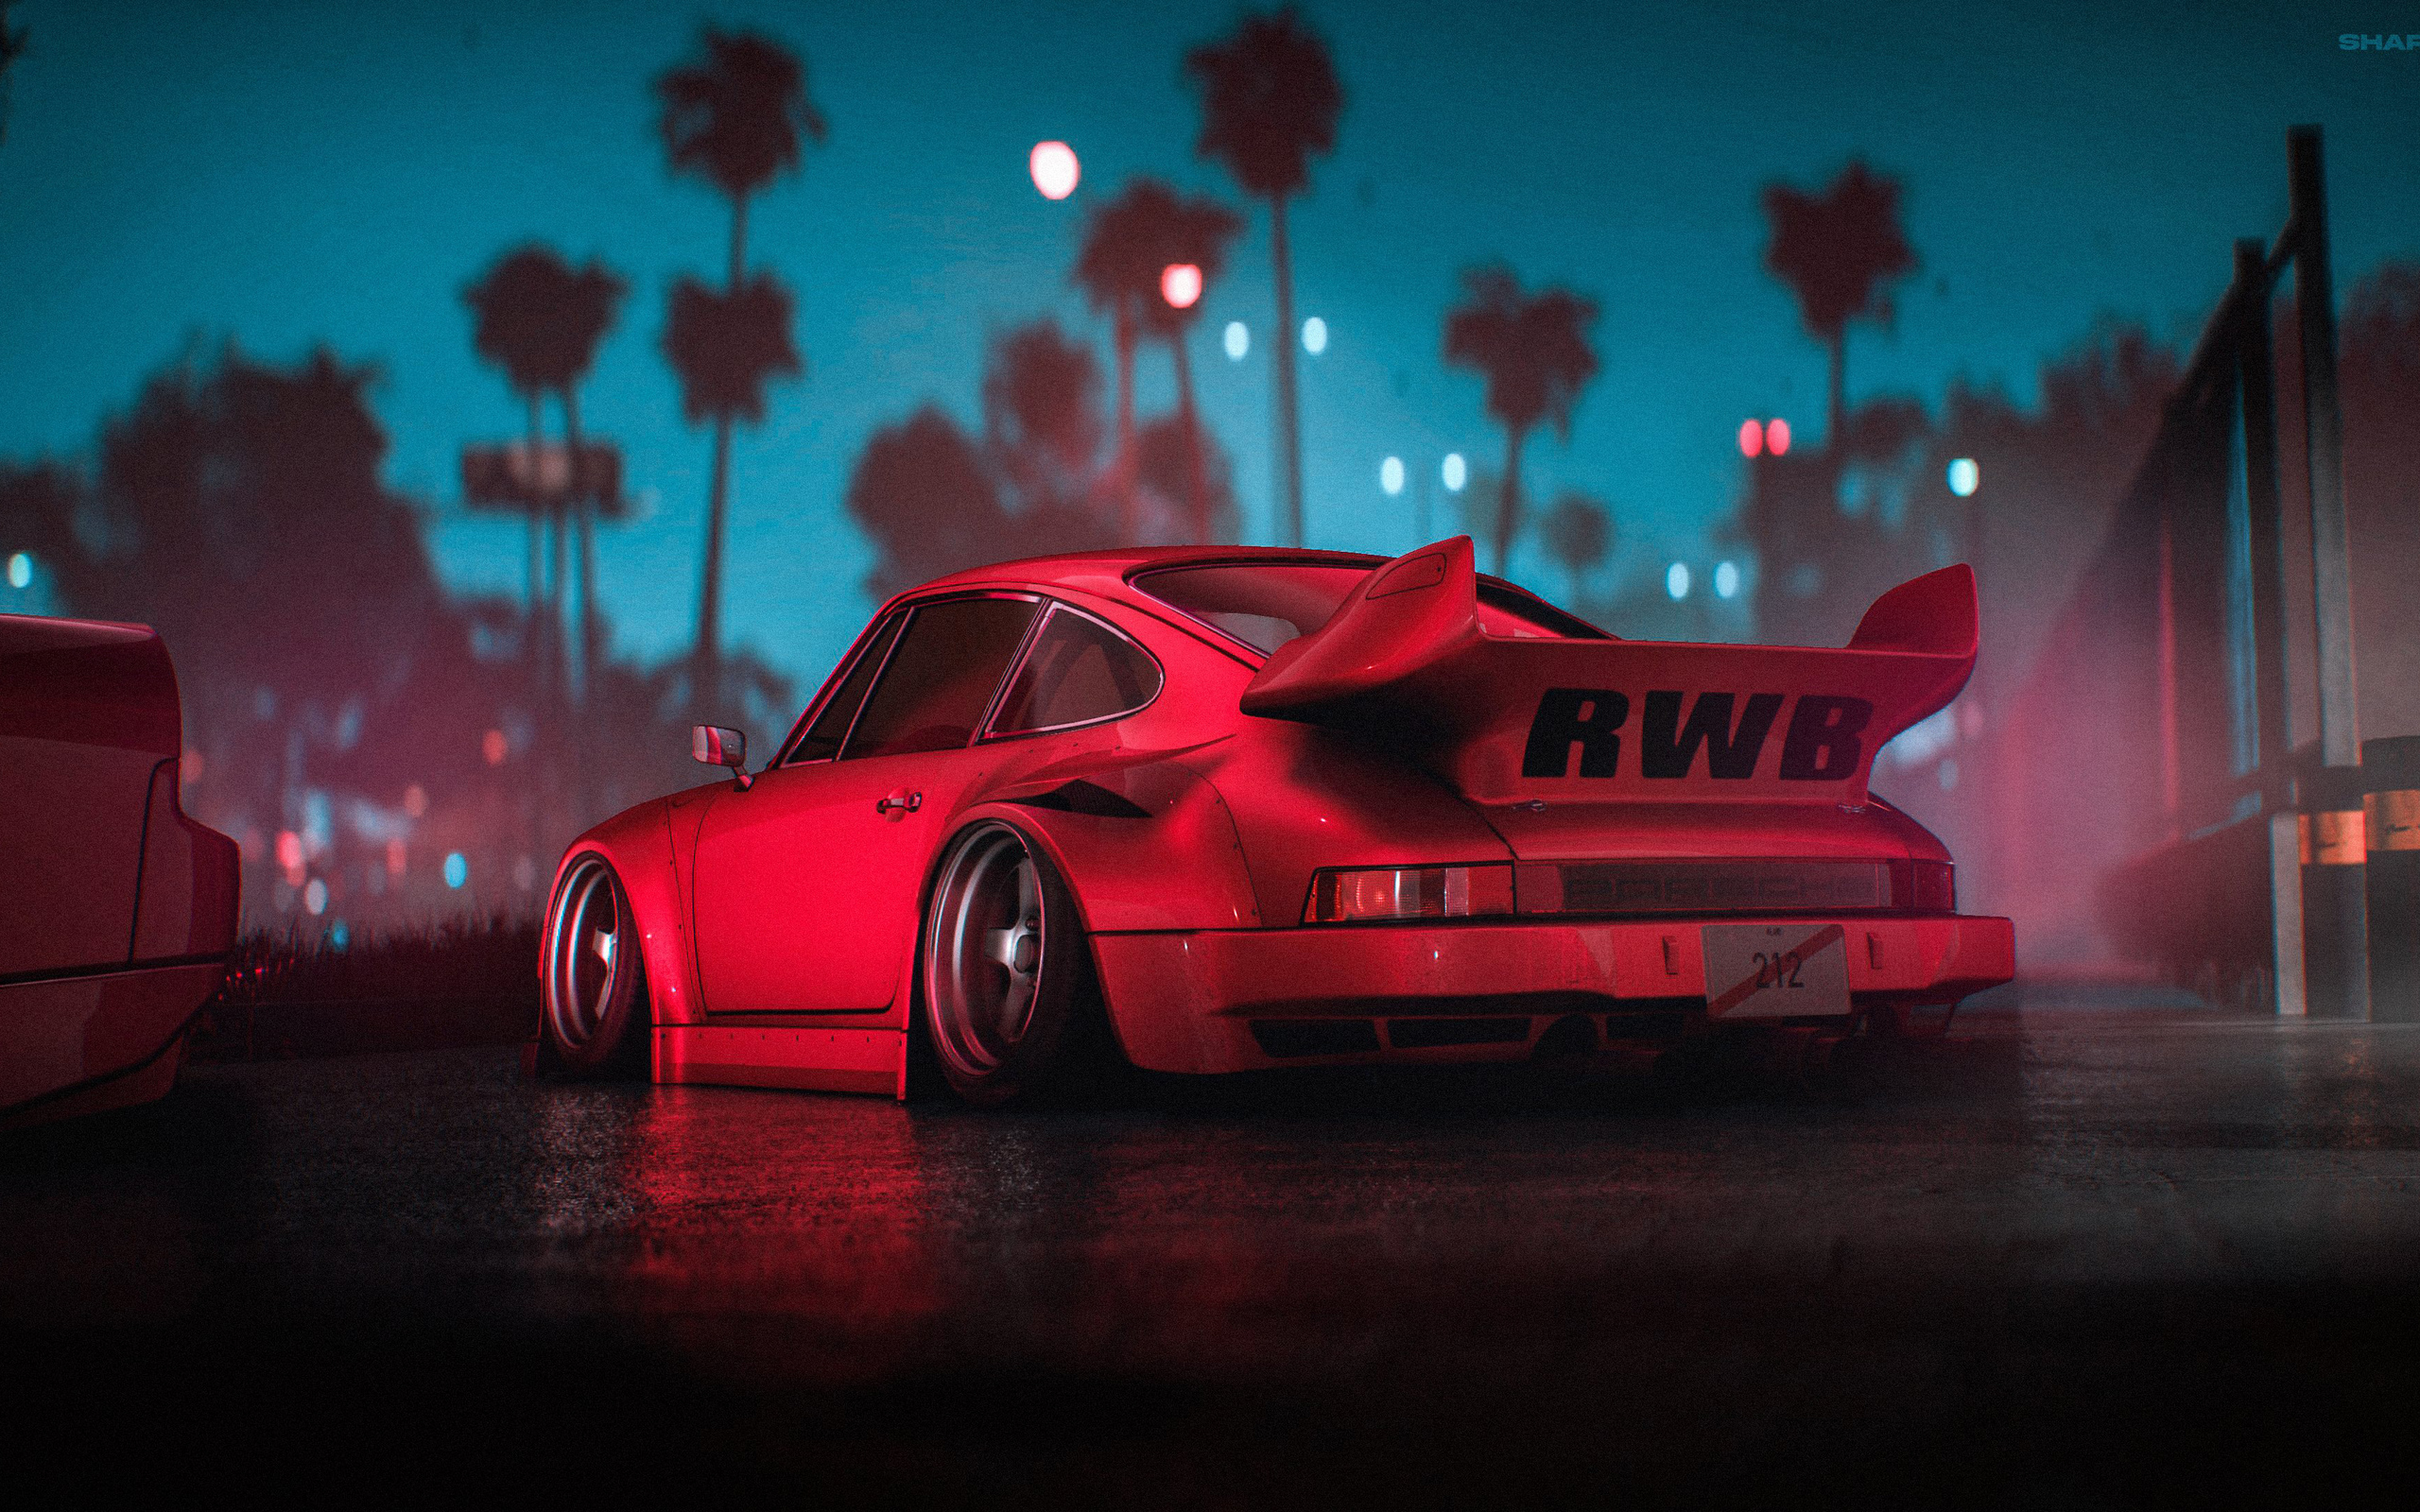 2560x1600 Porsche Rwb 911 4k 2560x1600 Resolution Hd 4k Wallpapers Images Backgrounds Photos And Pictures